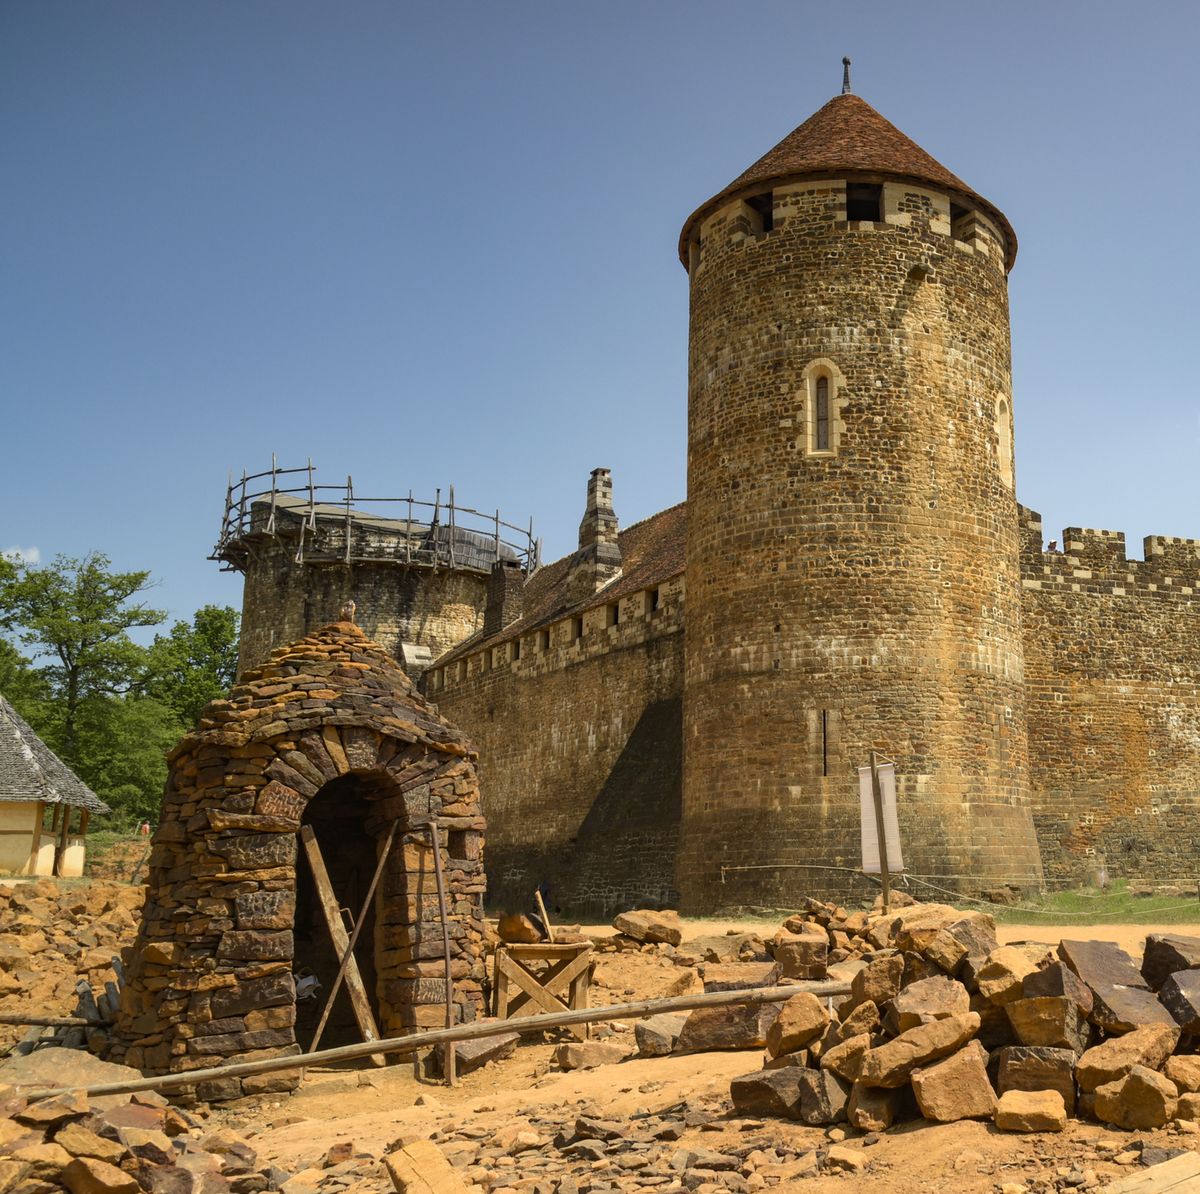 How Medieval Construction Methods Are Used at Guédelon Castle